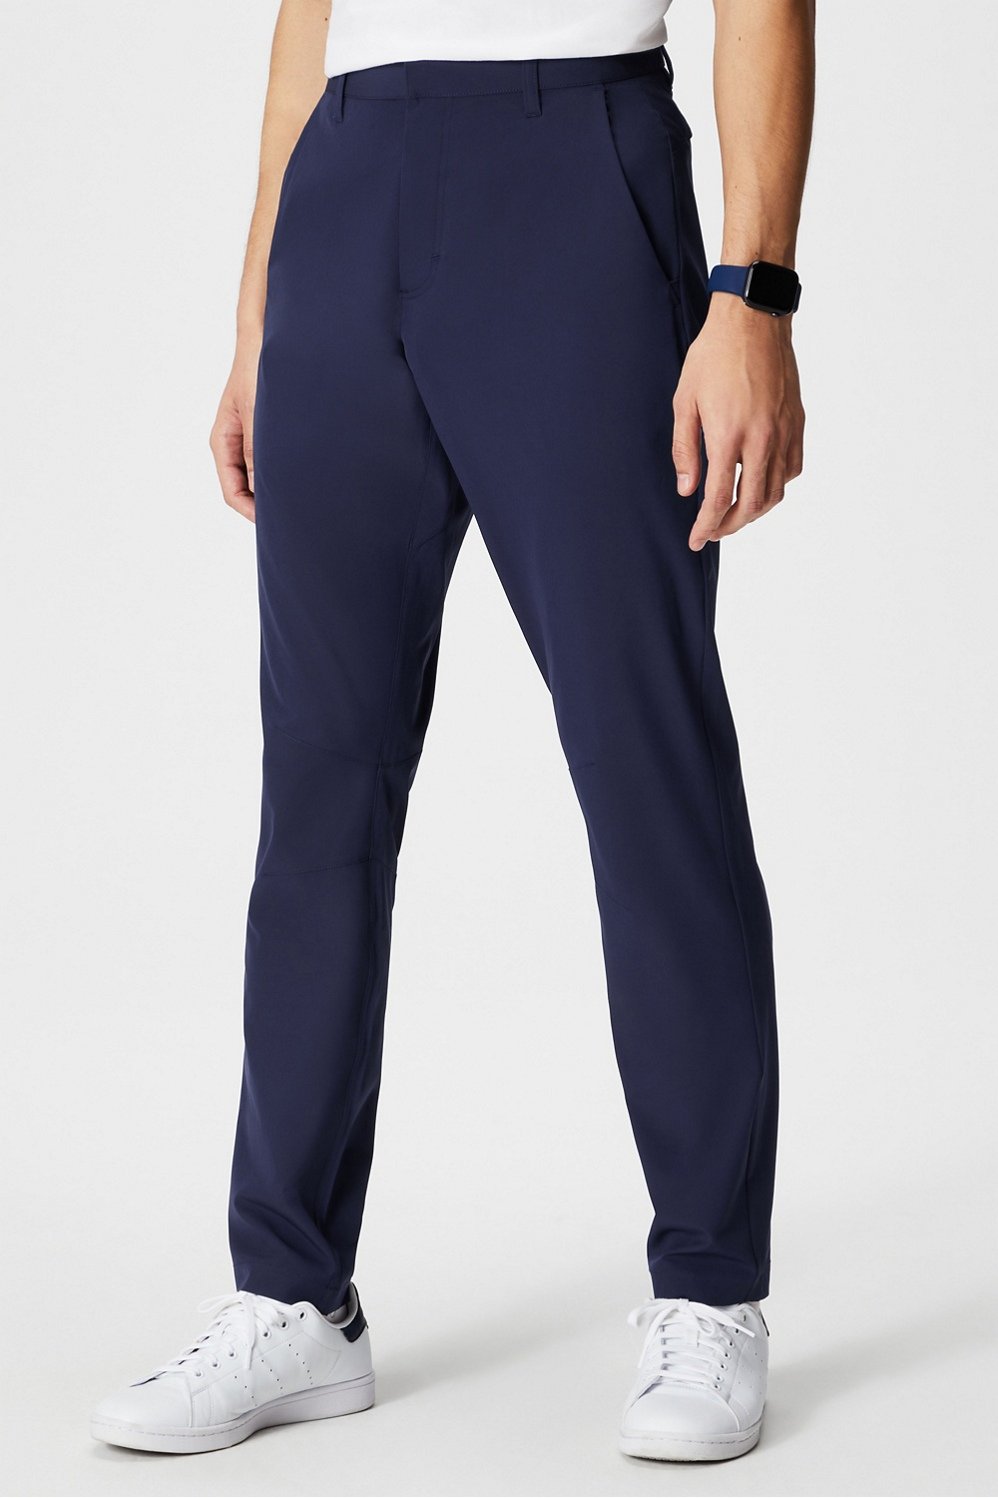 Fabletics Men's Pants The Only Pant Med Stretchy Water-Resistant Merlot Ret  $89